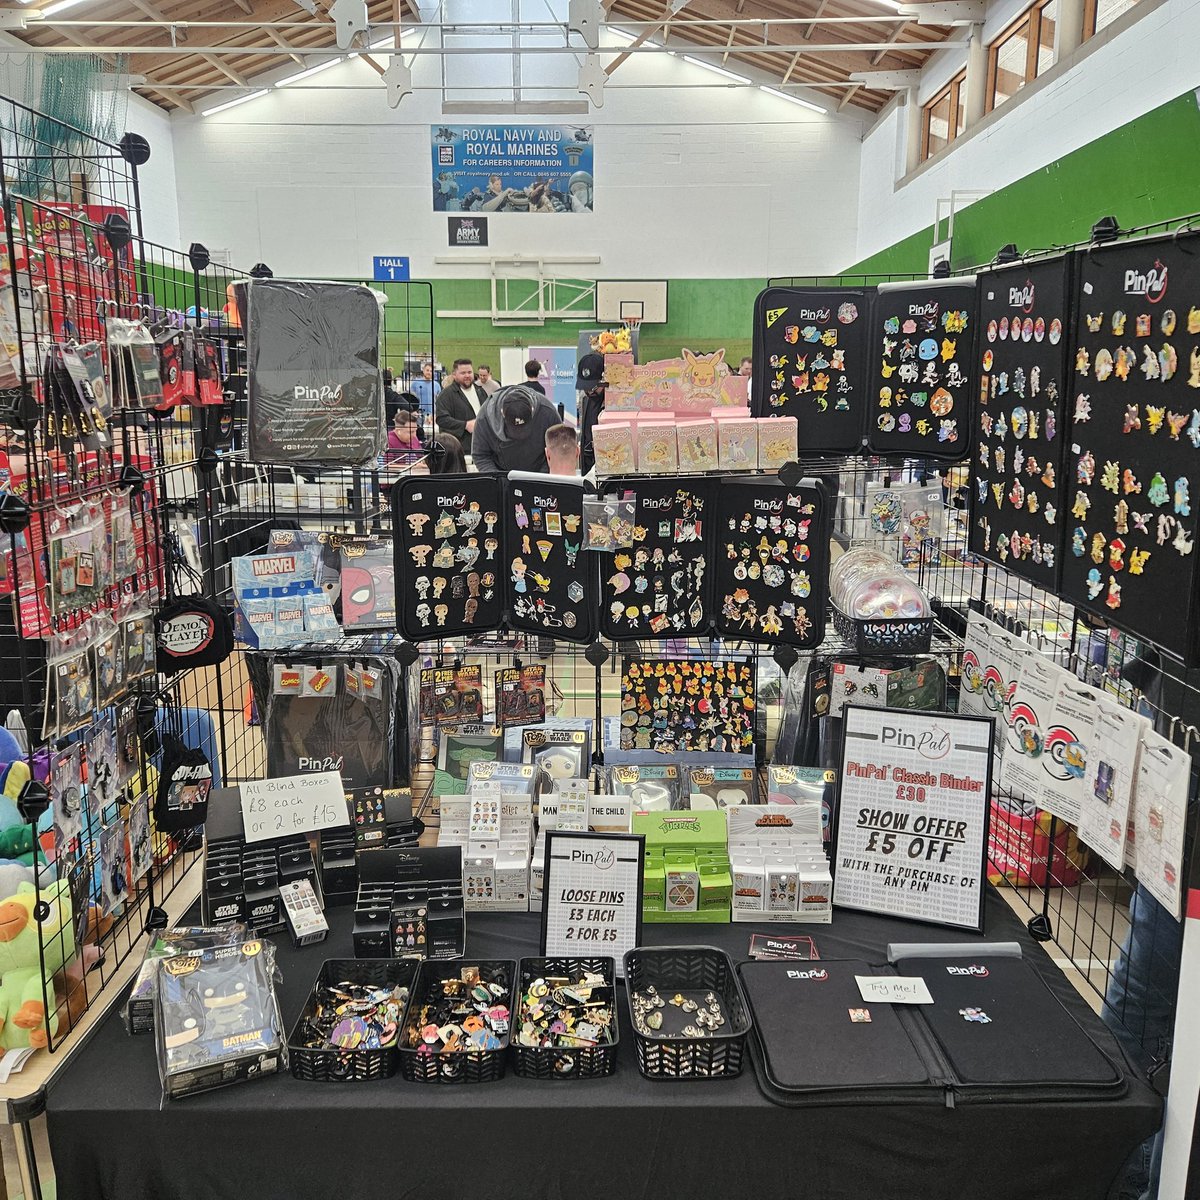 Ready to go! Find us at The TCG Show in Cambridge this weekend!

#CanbridgeEvents #PinCollector #PinCollection #PokemonPins #MarvelPins #DisneyPins #HarryPotterPins #EnamelPins #BatmanPins #PinTradingUK